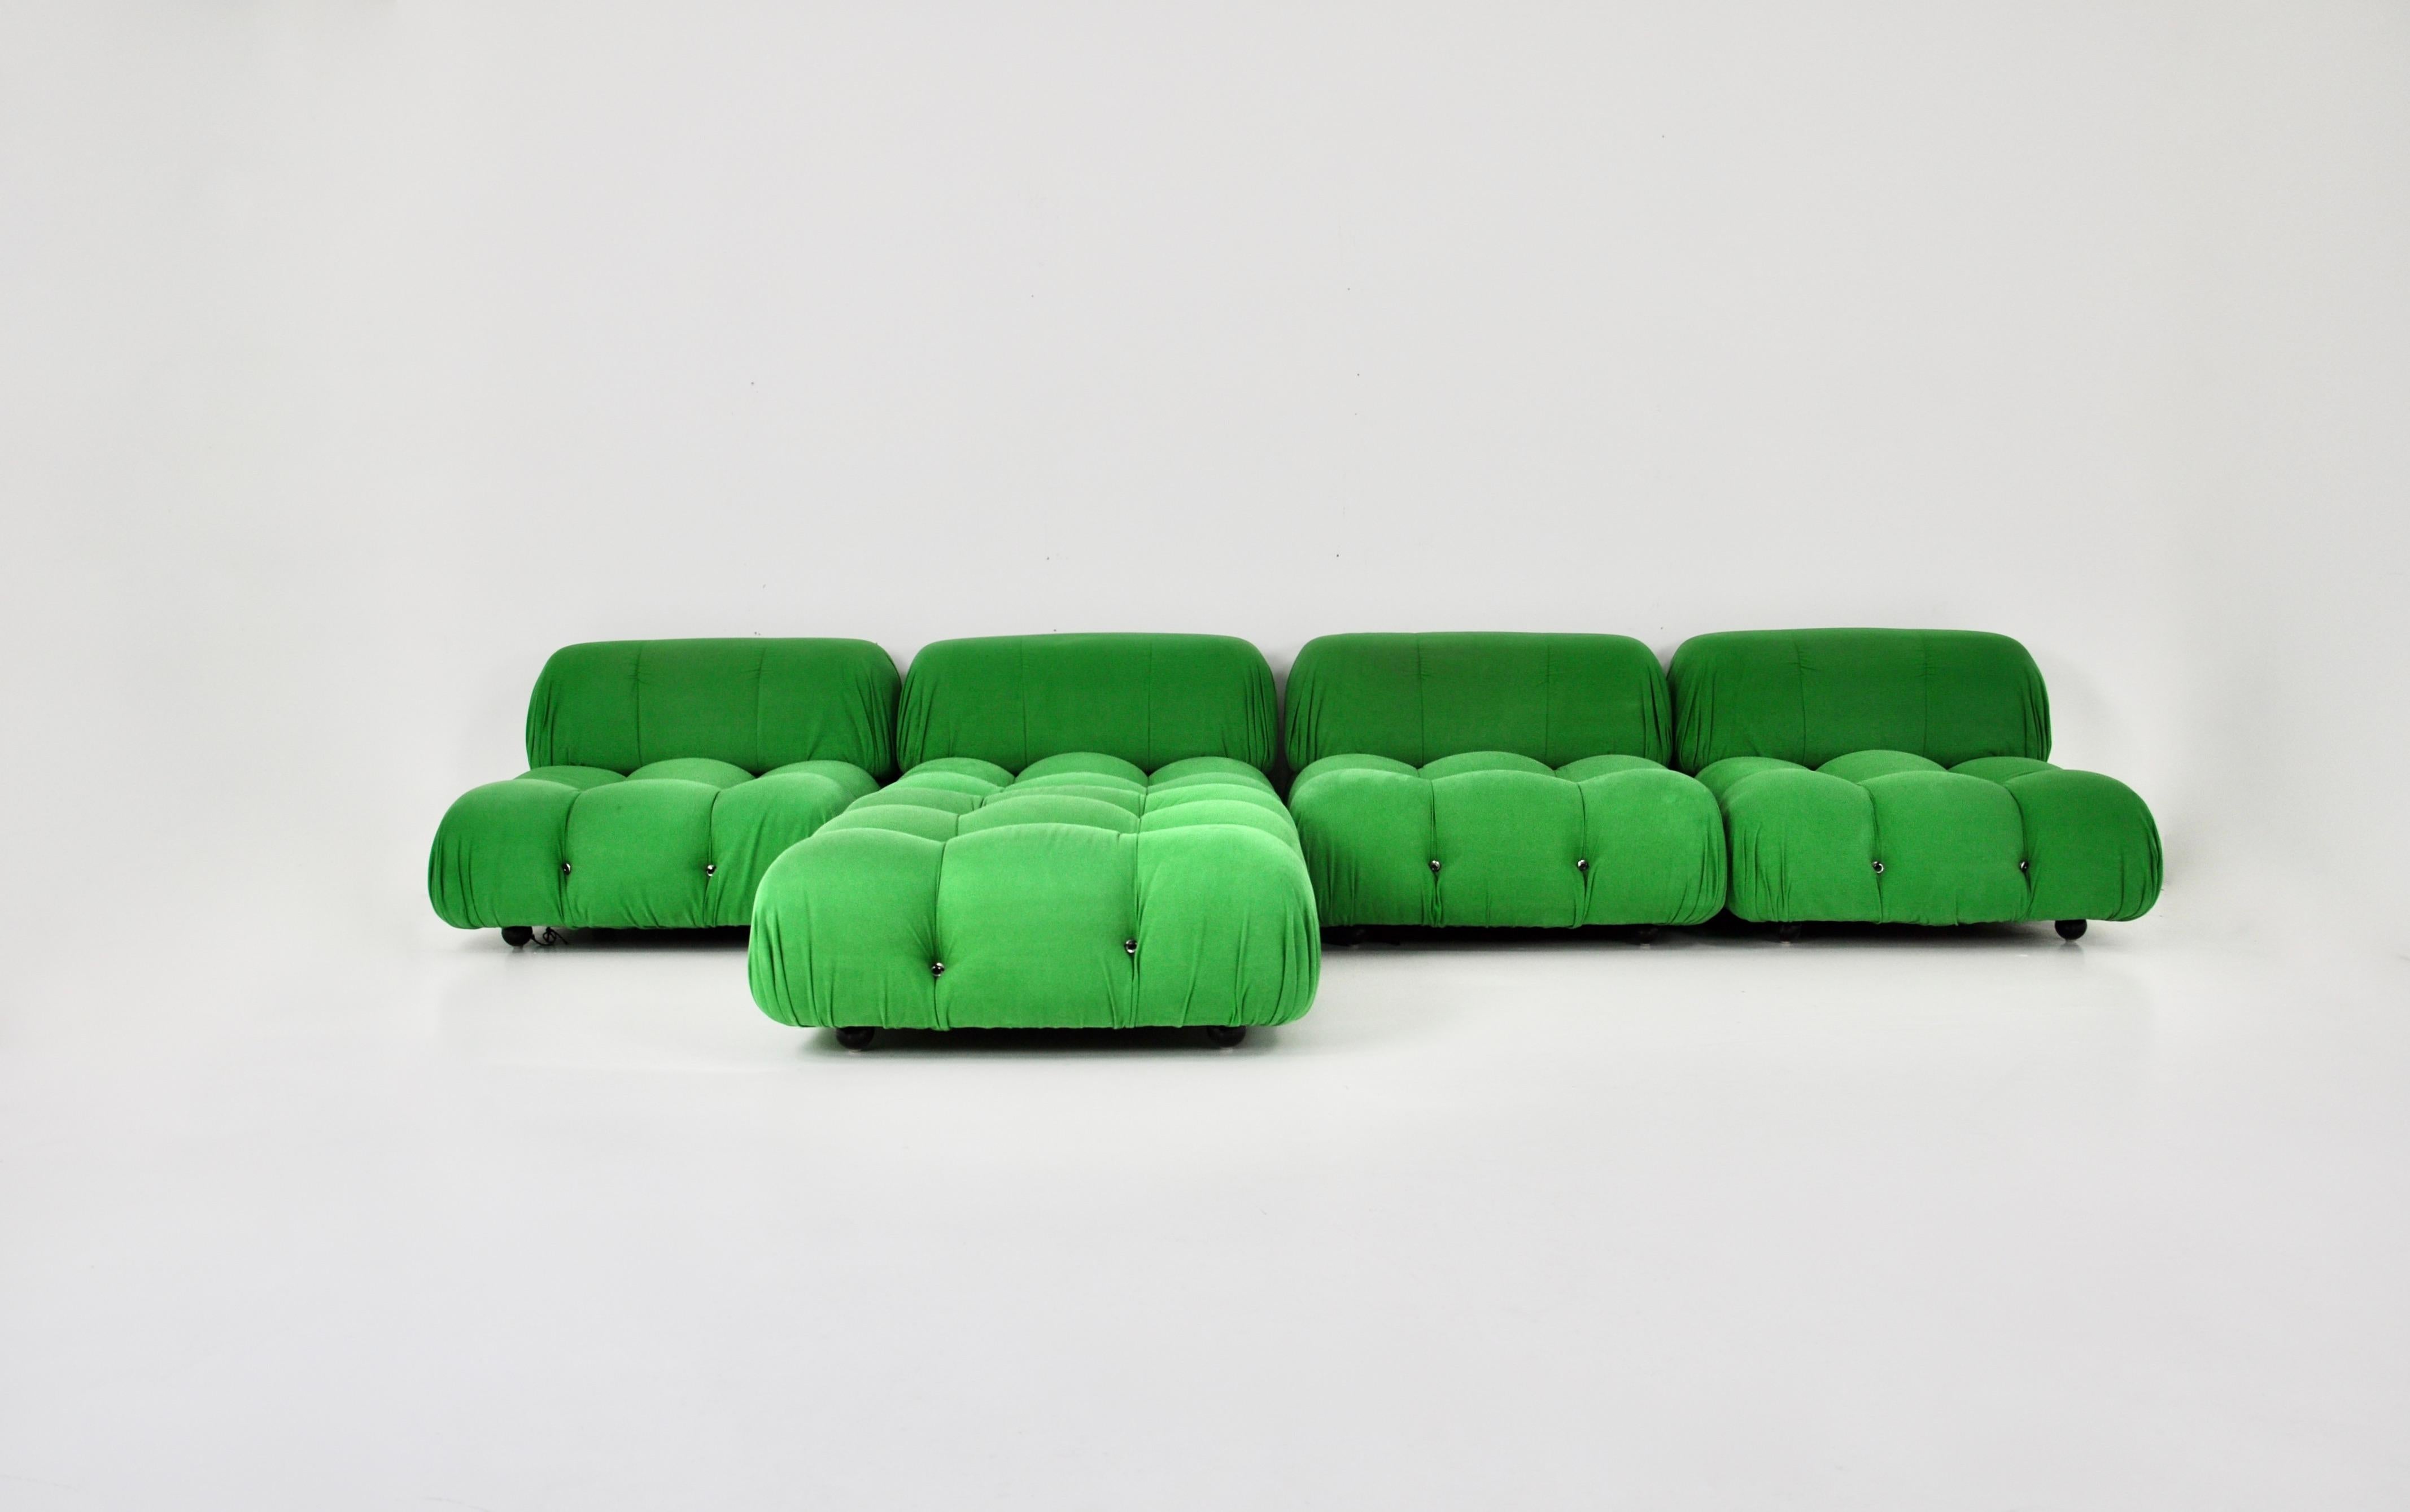 Sofa in green fabric. There are 4 large pieces and an ottoman. Seat height: 35 cm. Dimensions of one piece: H: 65 cm W: 93 cm D: 93 cm
Dimensions of the ottoman : H : 35 cm W : 93 cm D : 93 cm.
Wear due to time and age of the sofa.
Stamped B&B